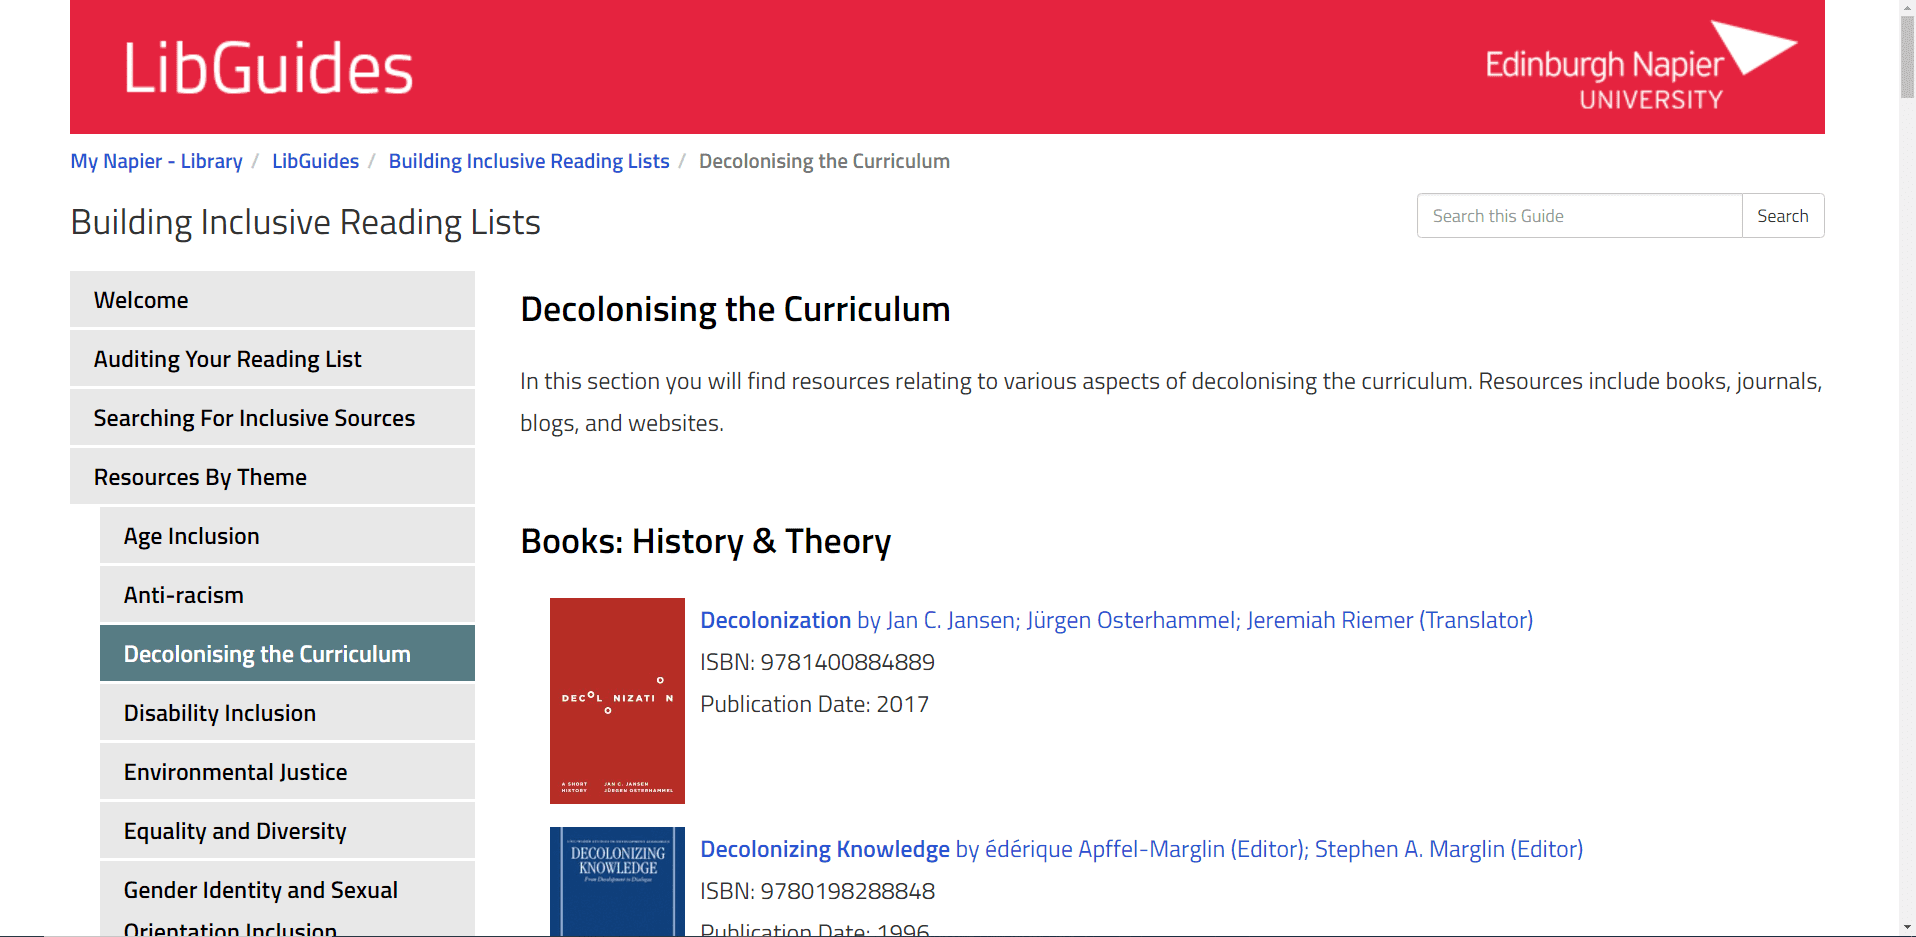 Edinburgh Napier Lib Guide webpage showing resources relating to decolonising the curriculum. Links down the left list other inclusion topics which have Lib Guides, and Lib Guides with recommendations for diverse reading for various subject areas.